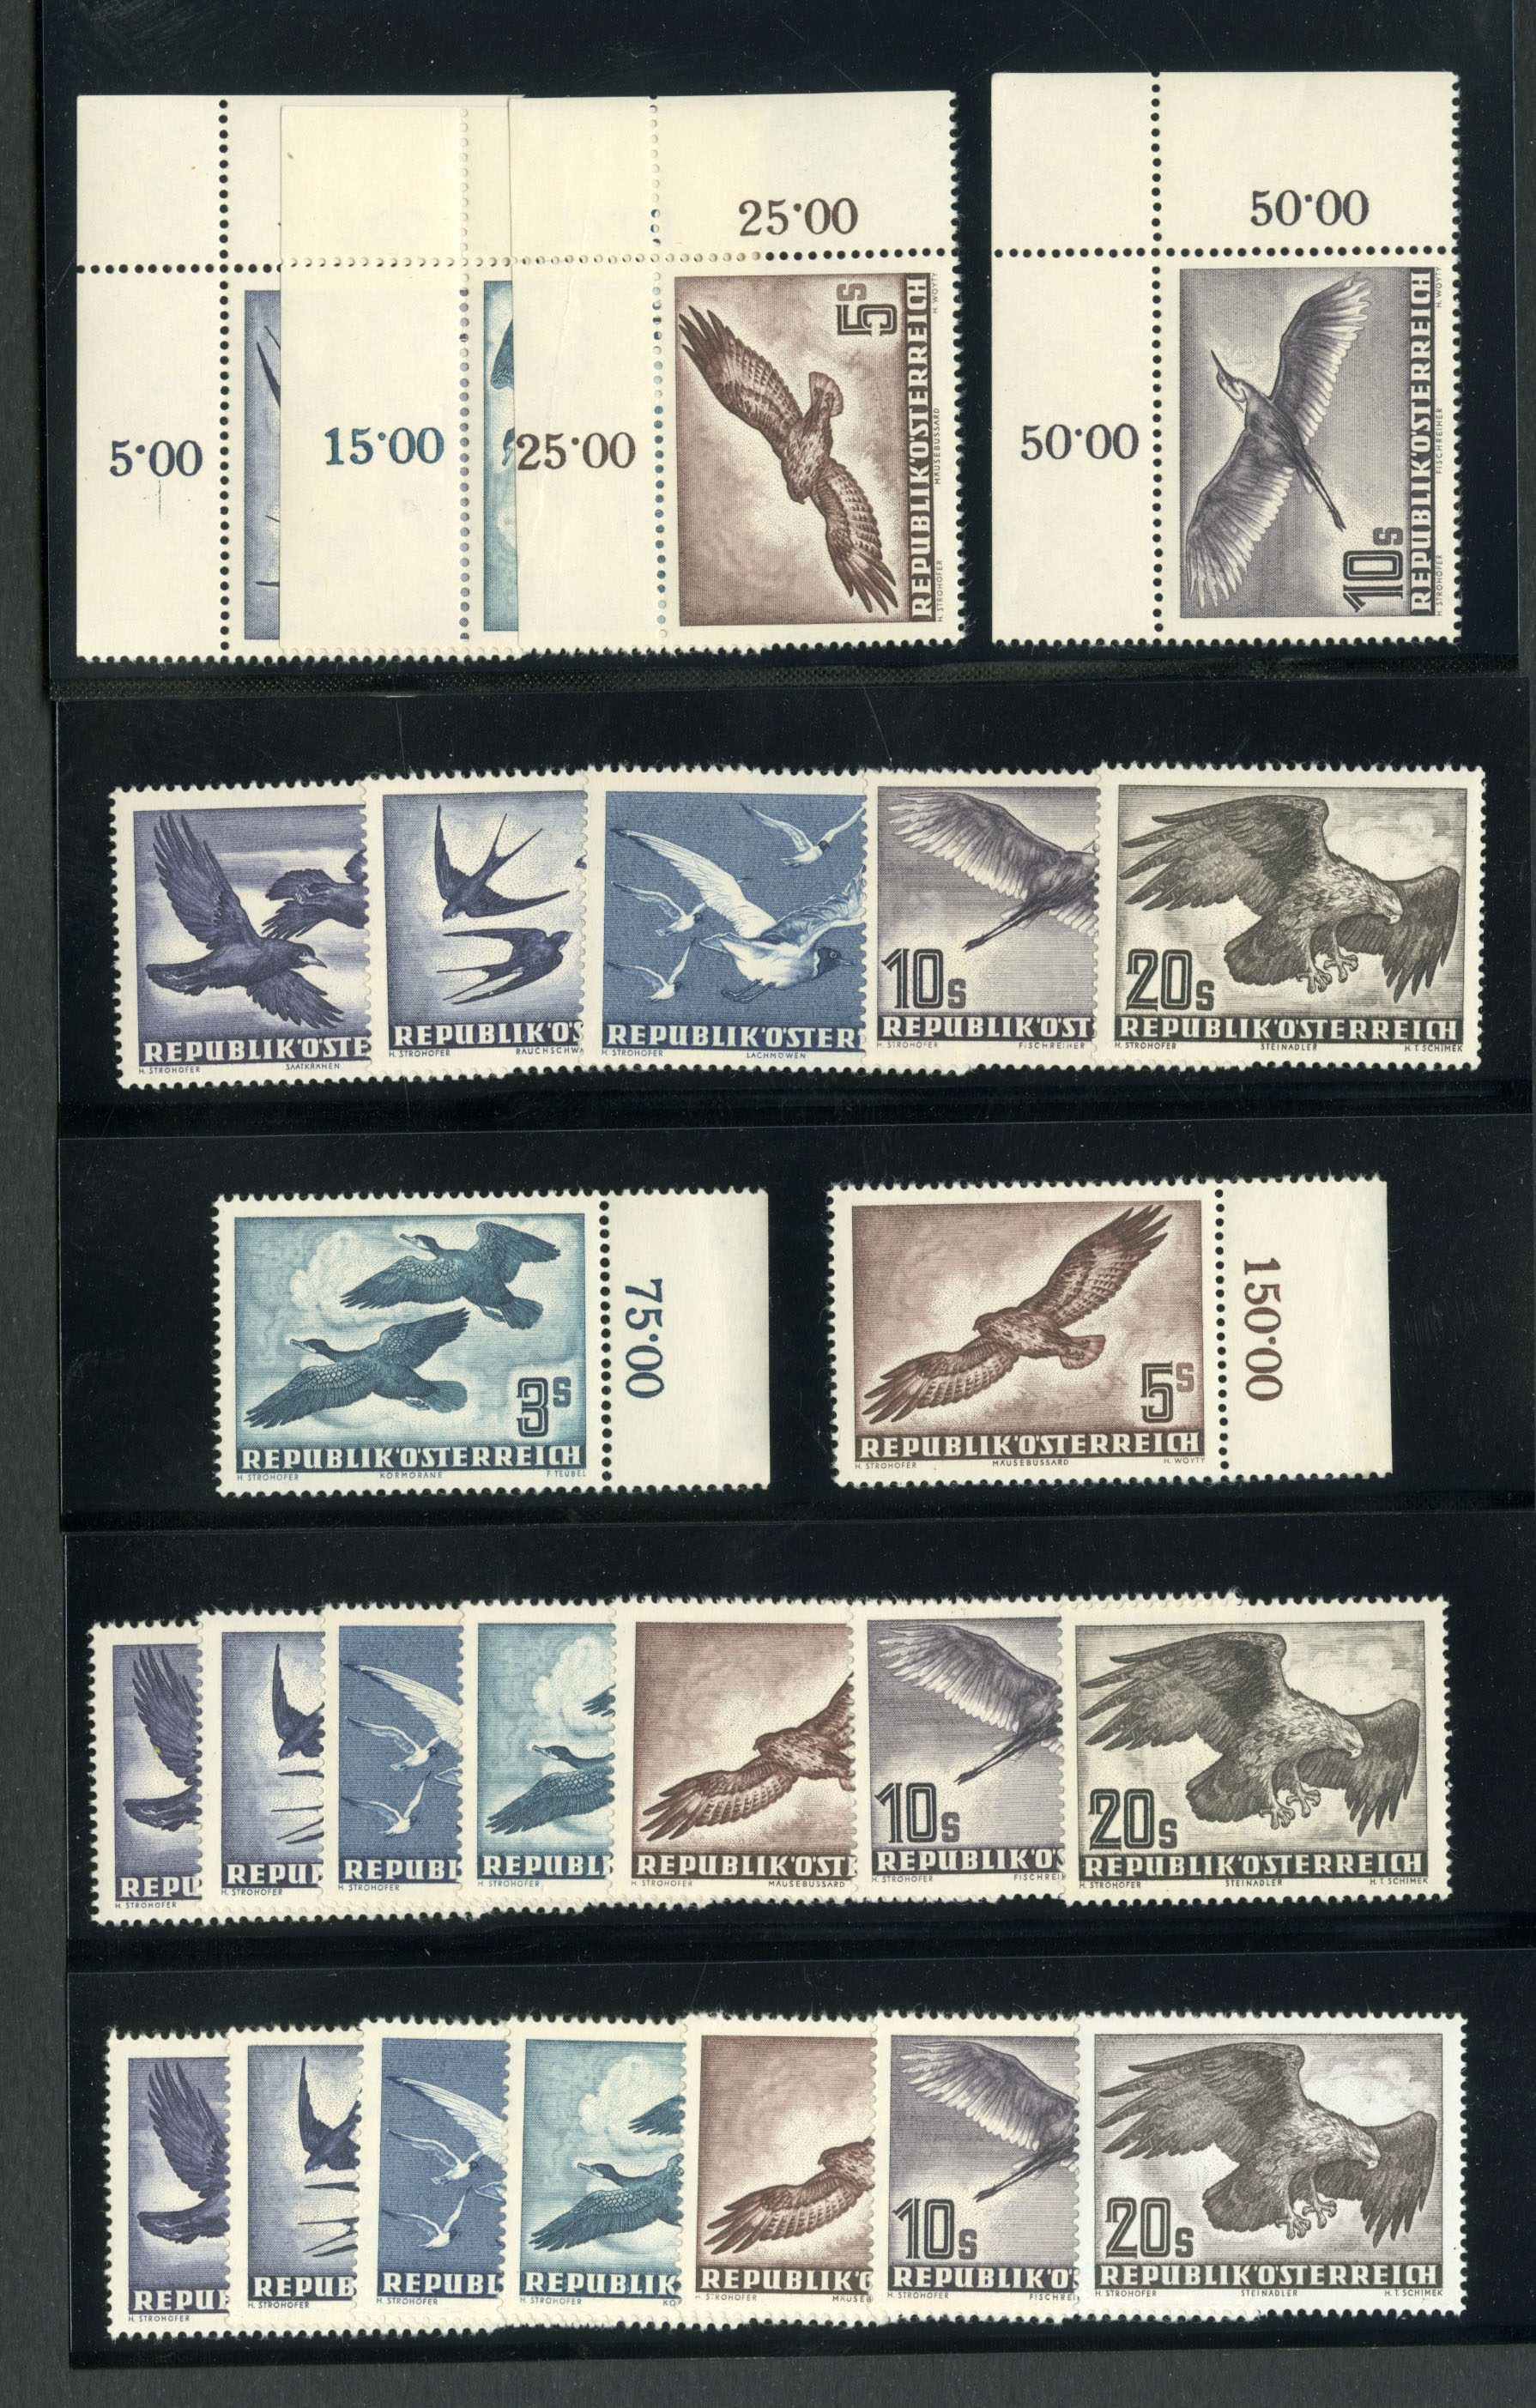 Lot 270 - China  -  Cherrystone Auctions Rare Stamps & Postal History of the World